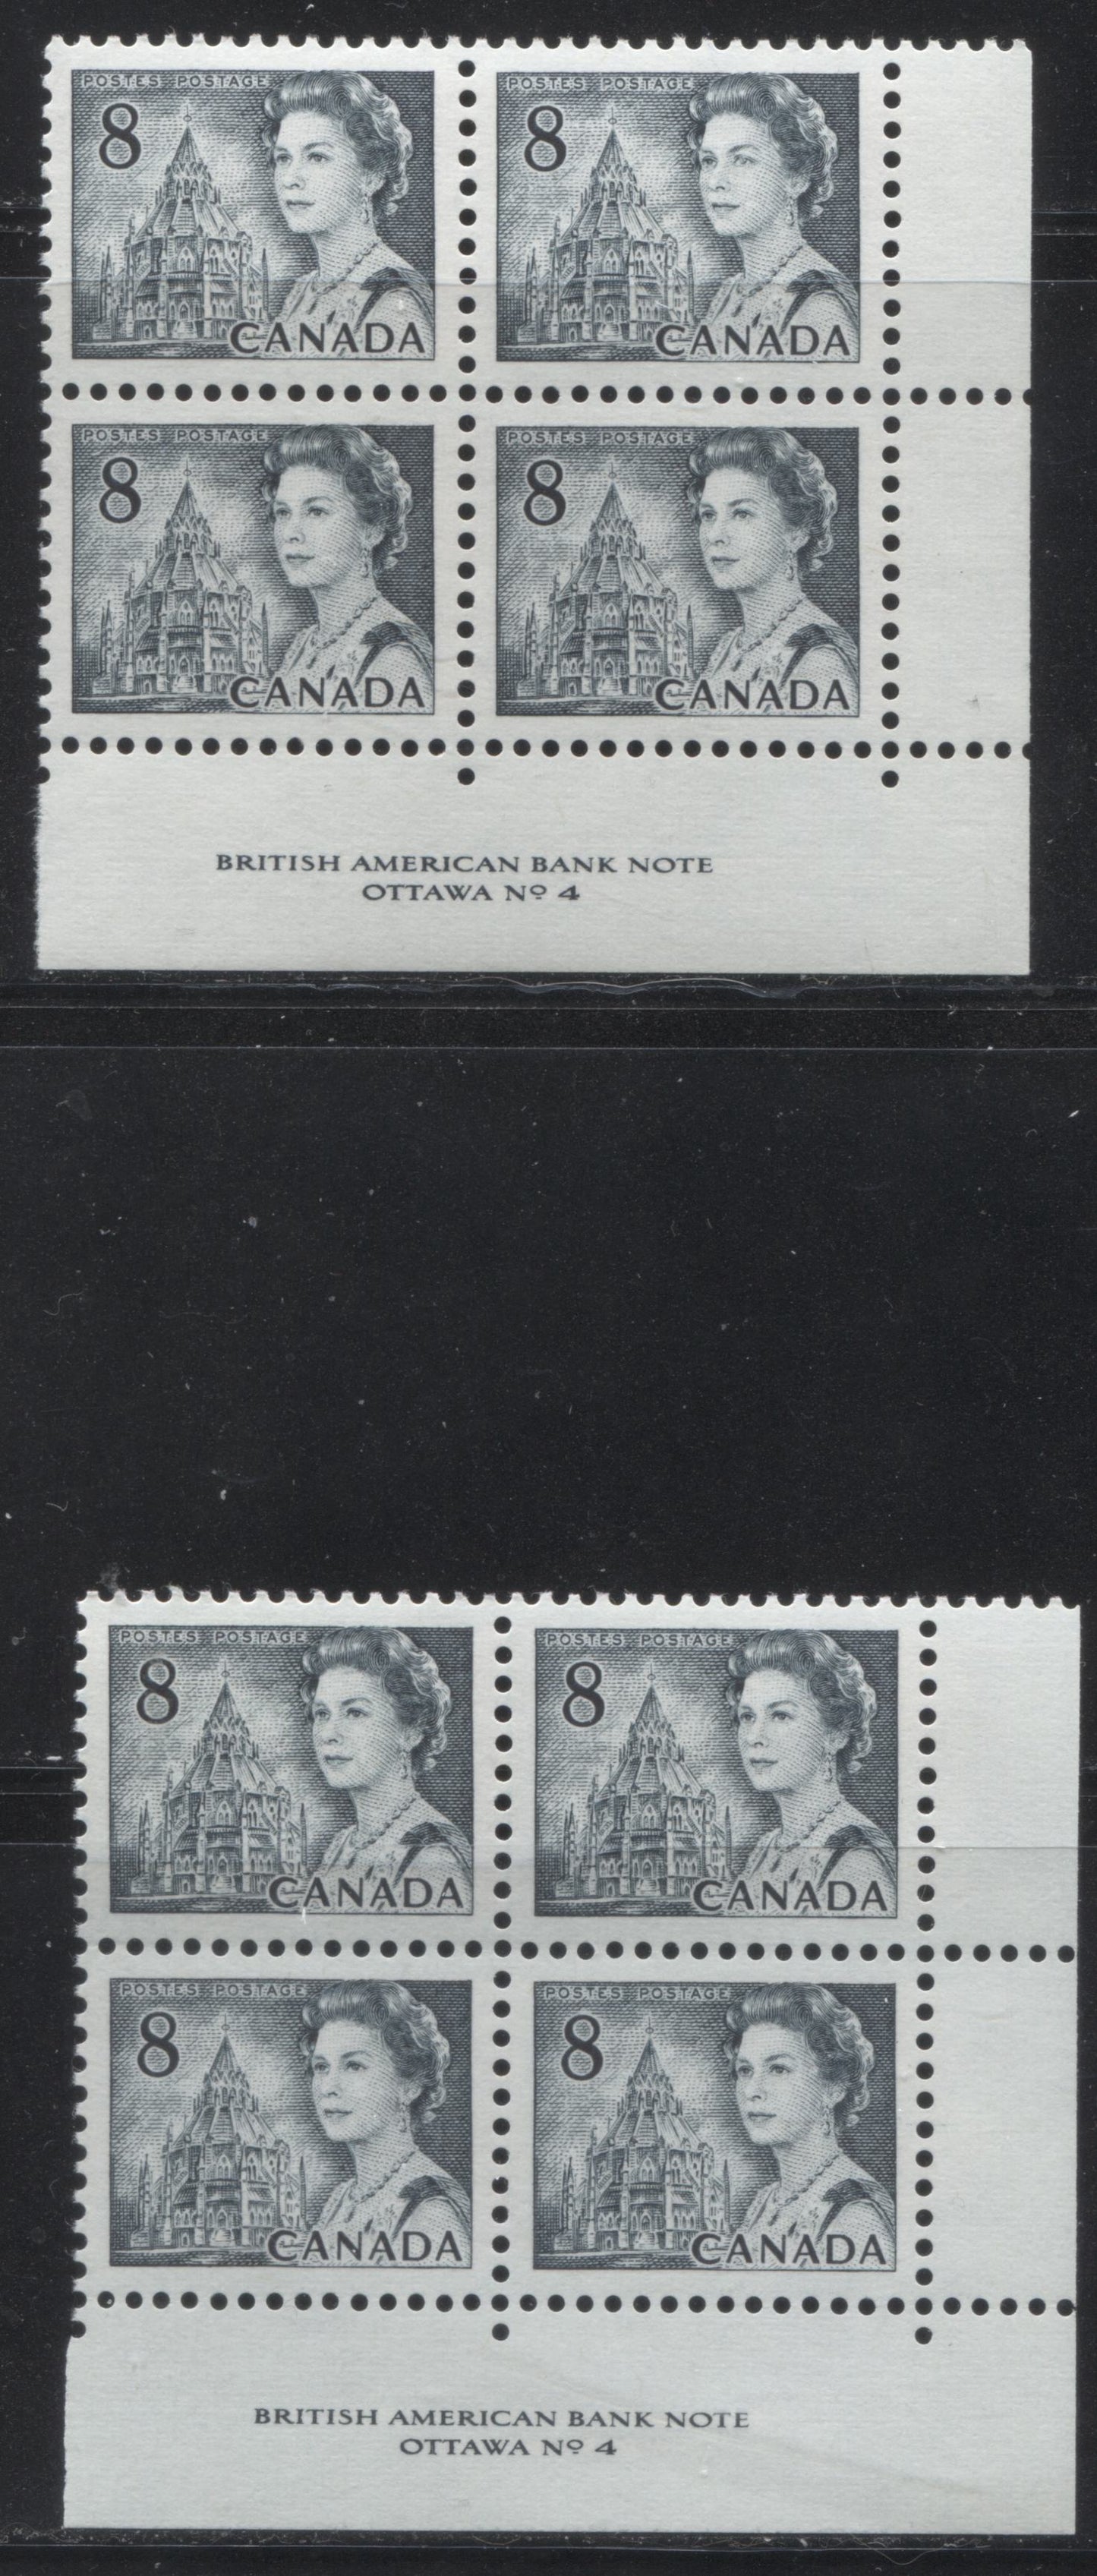 Lot 136 Canada #544ii 8c Slate Queen Elizabeth II, 1967-1973 Centennial Issue, Two VFNH LR Plate 4 Blocks Of 4 On LF Grayish White & Violet On Back, Ribbed Papers With PVA Gums